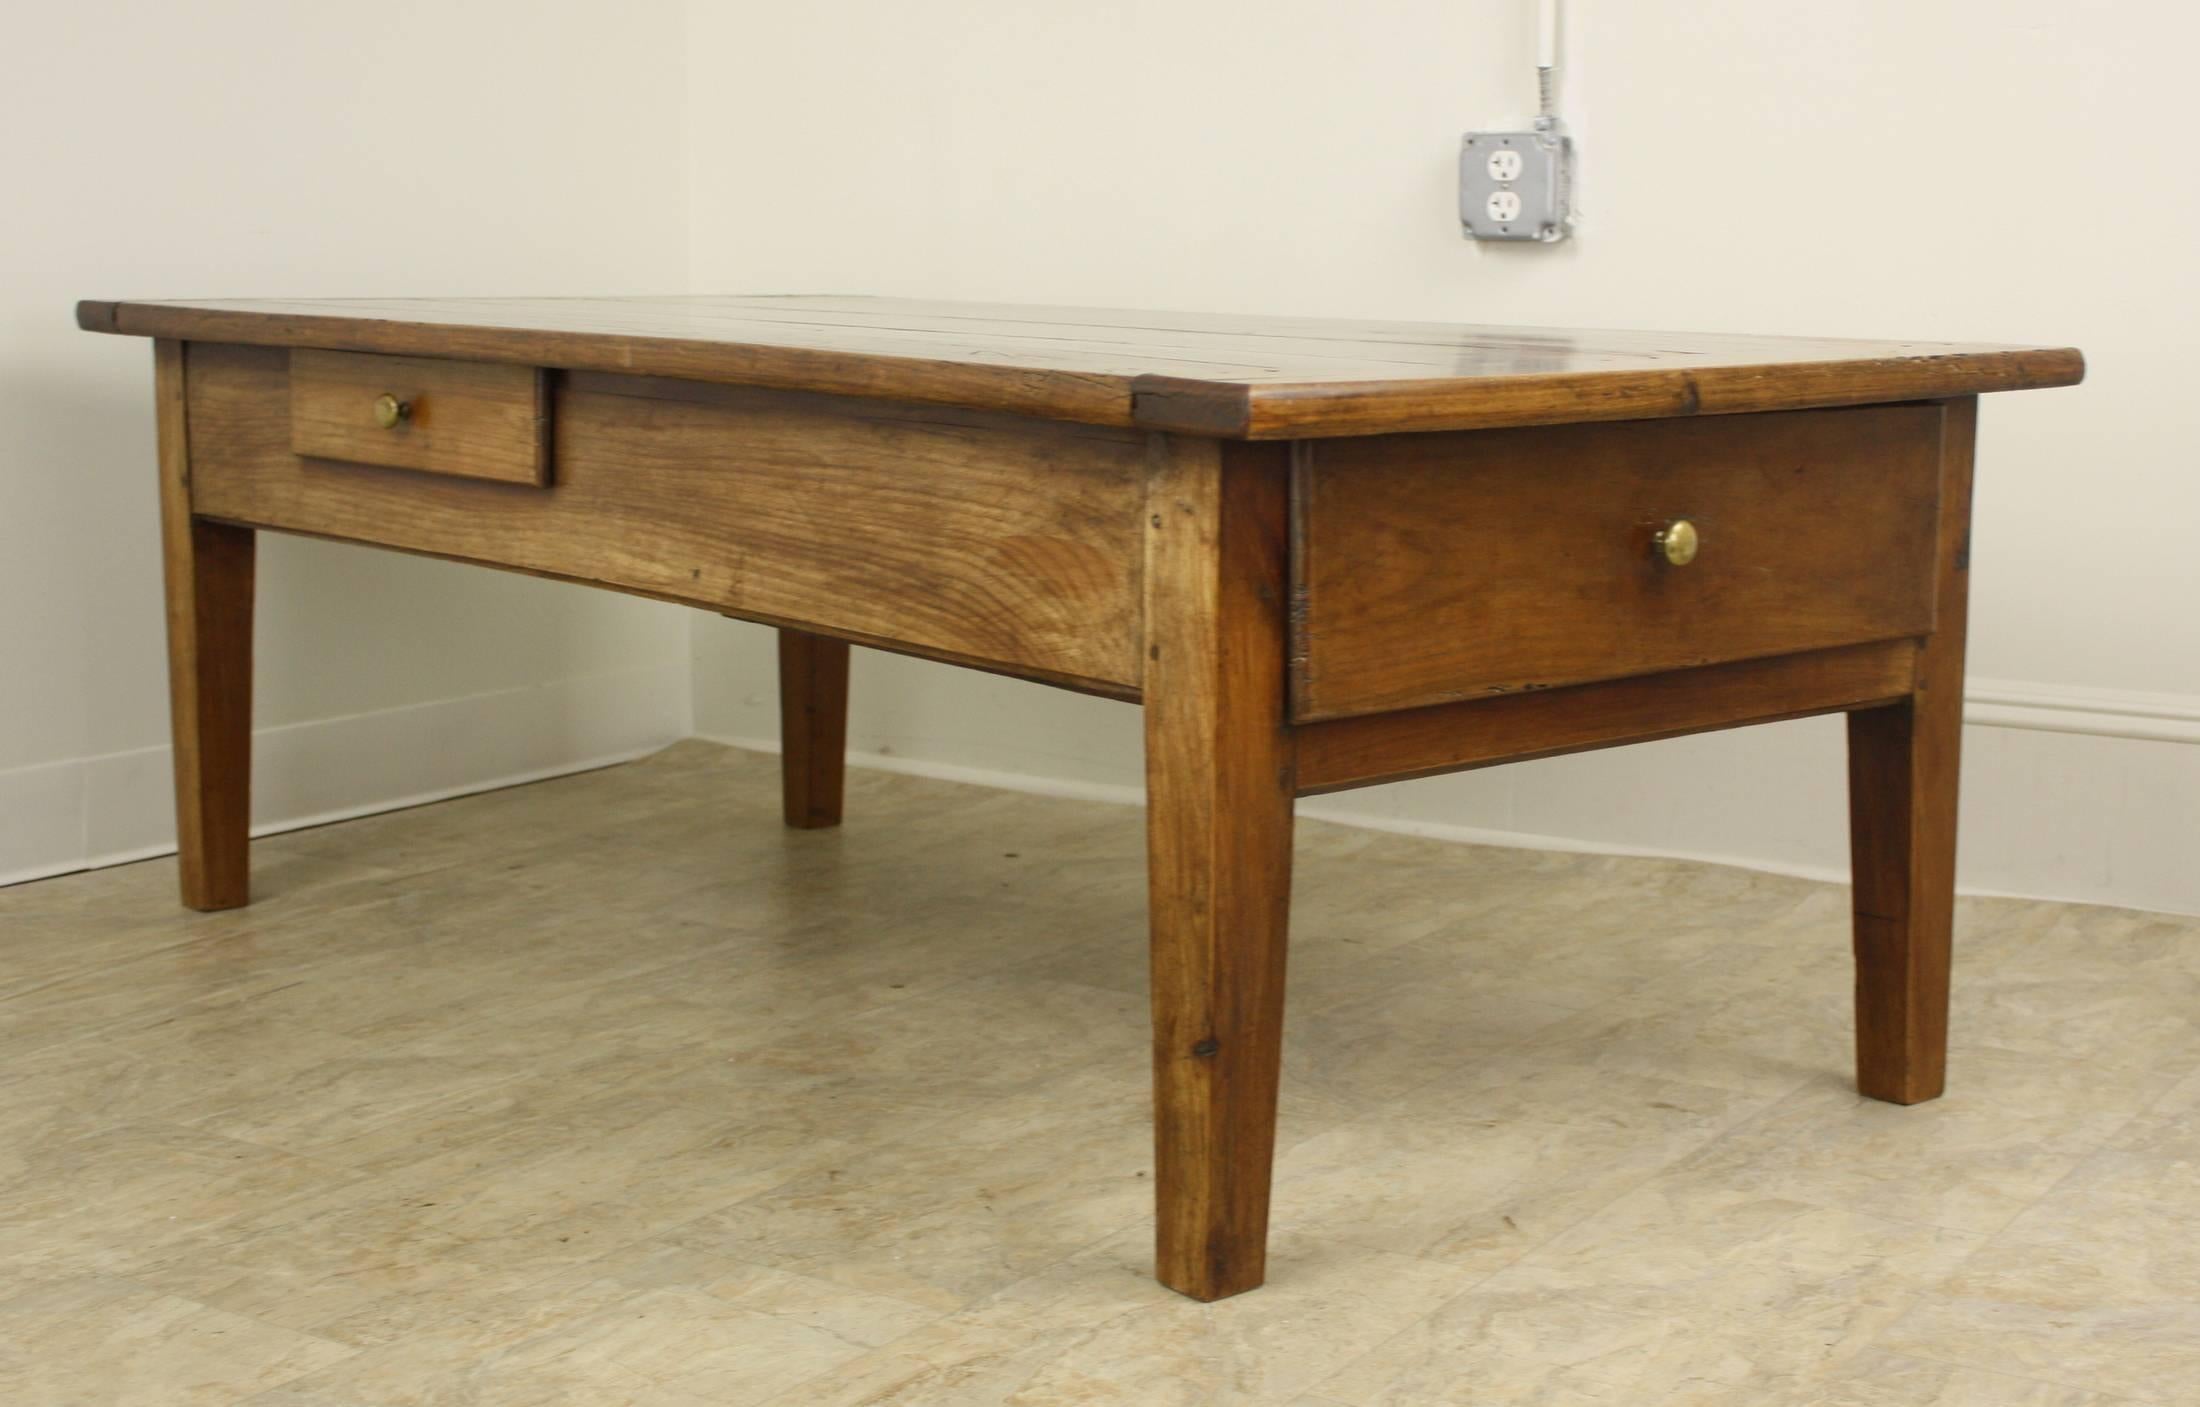 A very lovely warm rich honey cherrywood in a large size, very attractive coffee table. There is a large drawer on one end and a smaller drawer on one long side. There is a breadboard end, and the legs are chunky and sturdy yet have a nice Classic